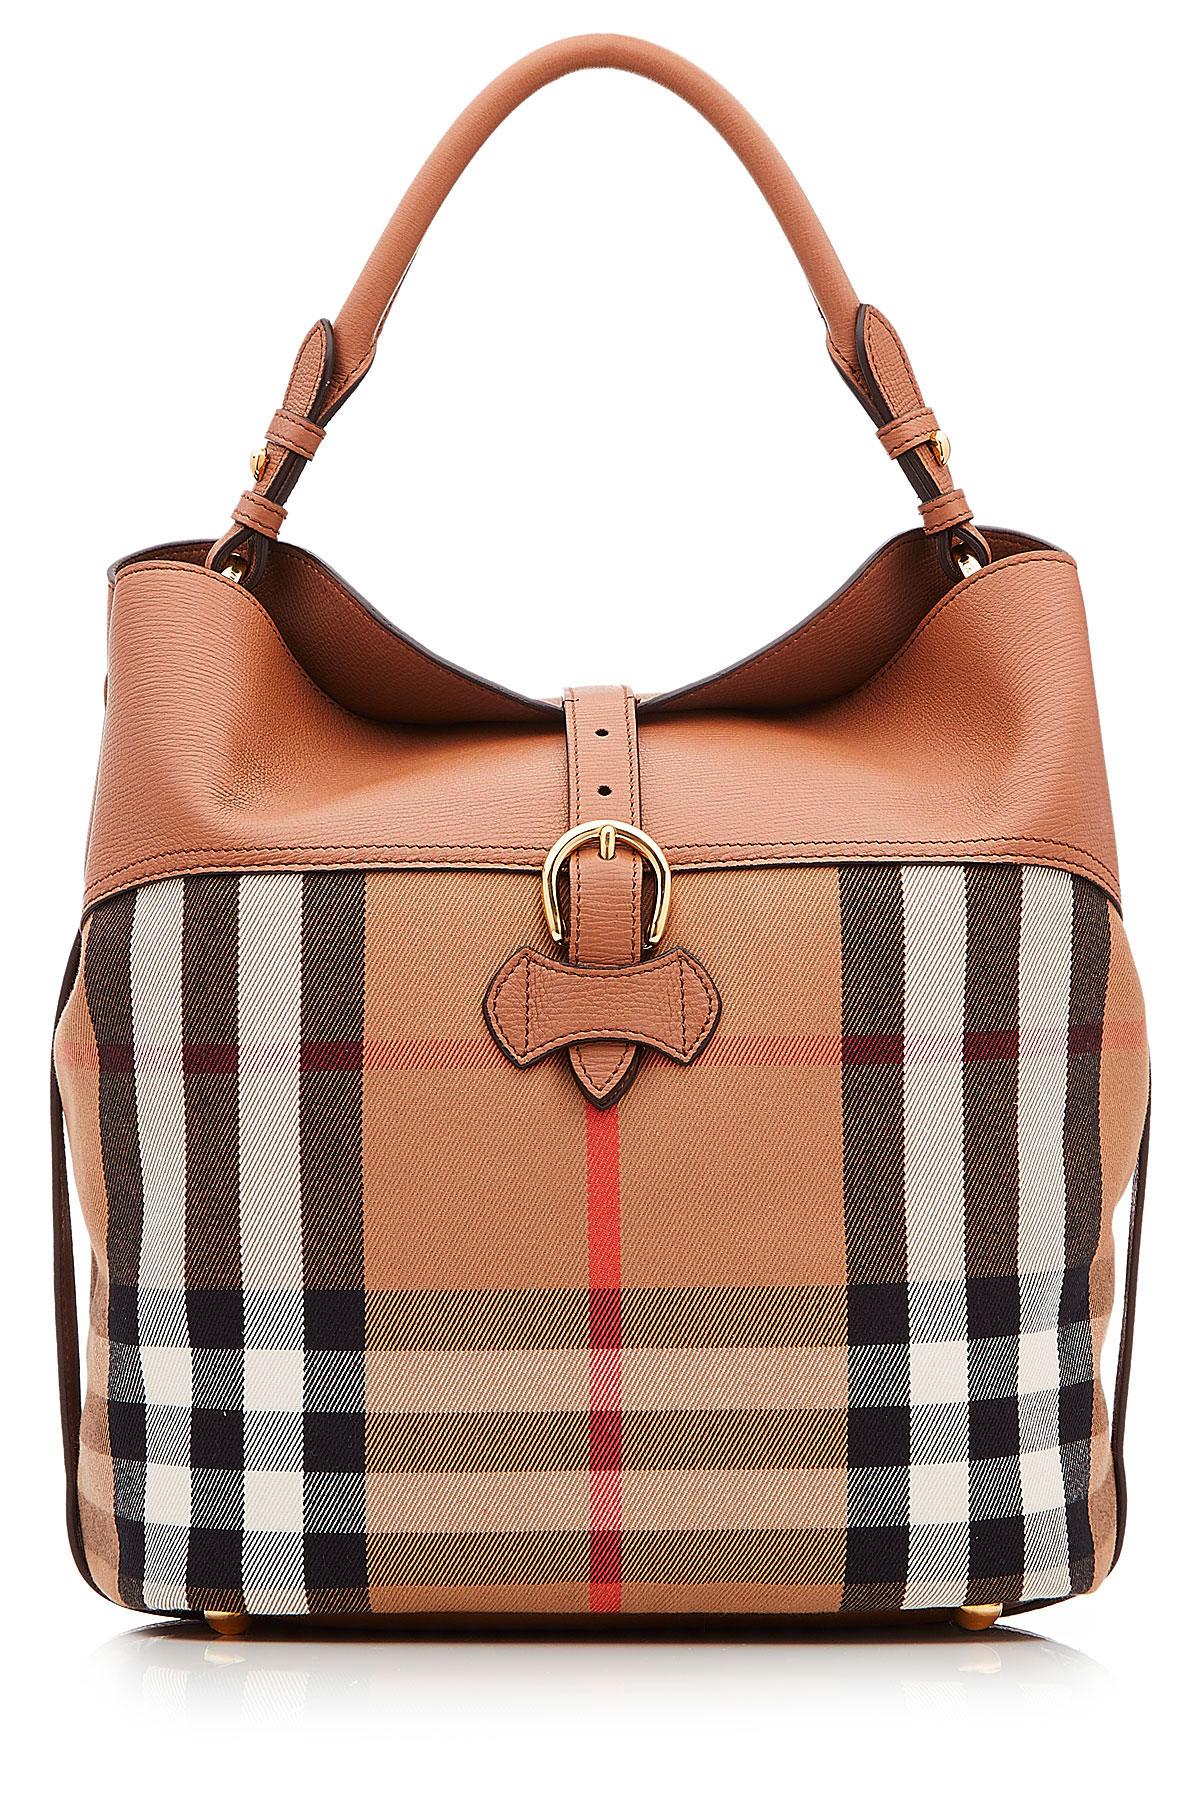 Burberry Leather And Printed Fabric Bucket Bag - Multicolor in Brown | Lyst